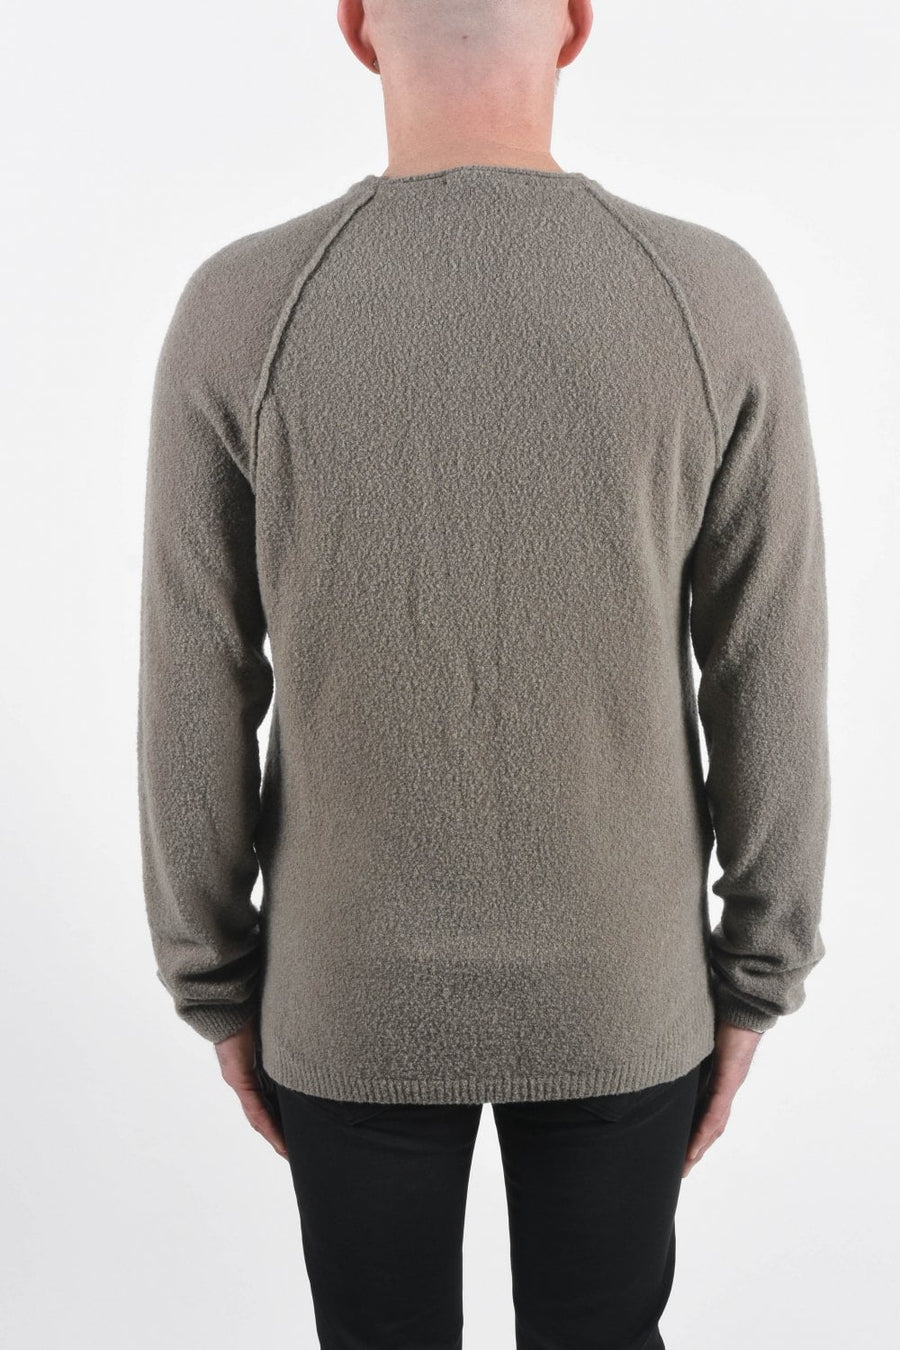 Buy the Daniele Fiesoli Boiled Wool Round Neck Knit Taupe at Intro. Spend £100 for free next day UK delivery. Official stockists. We ship worldwide